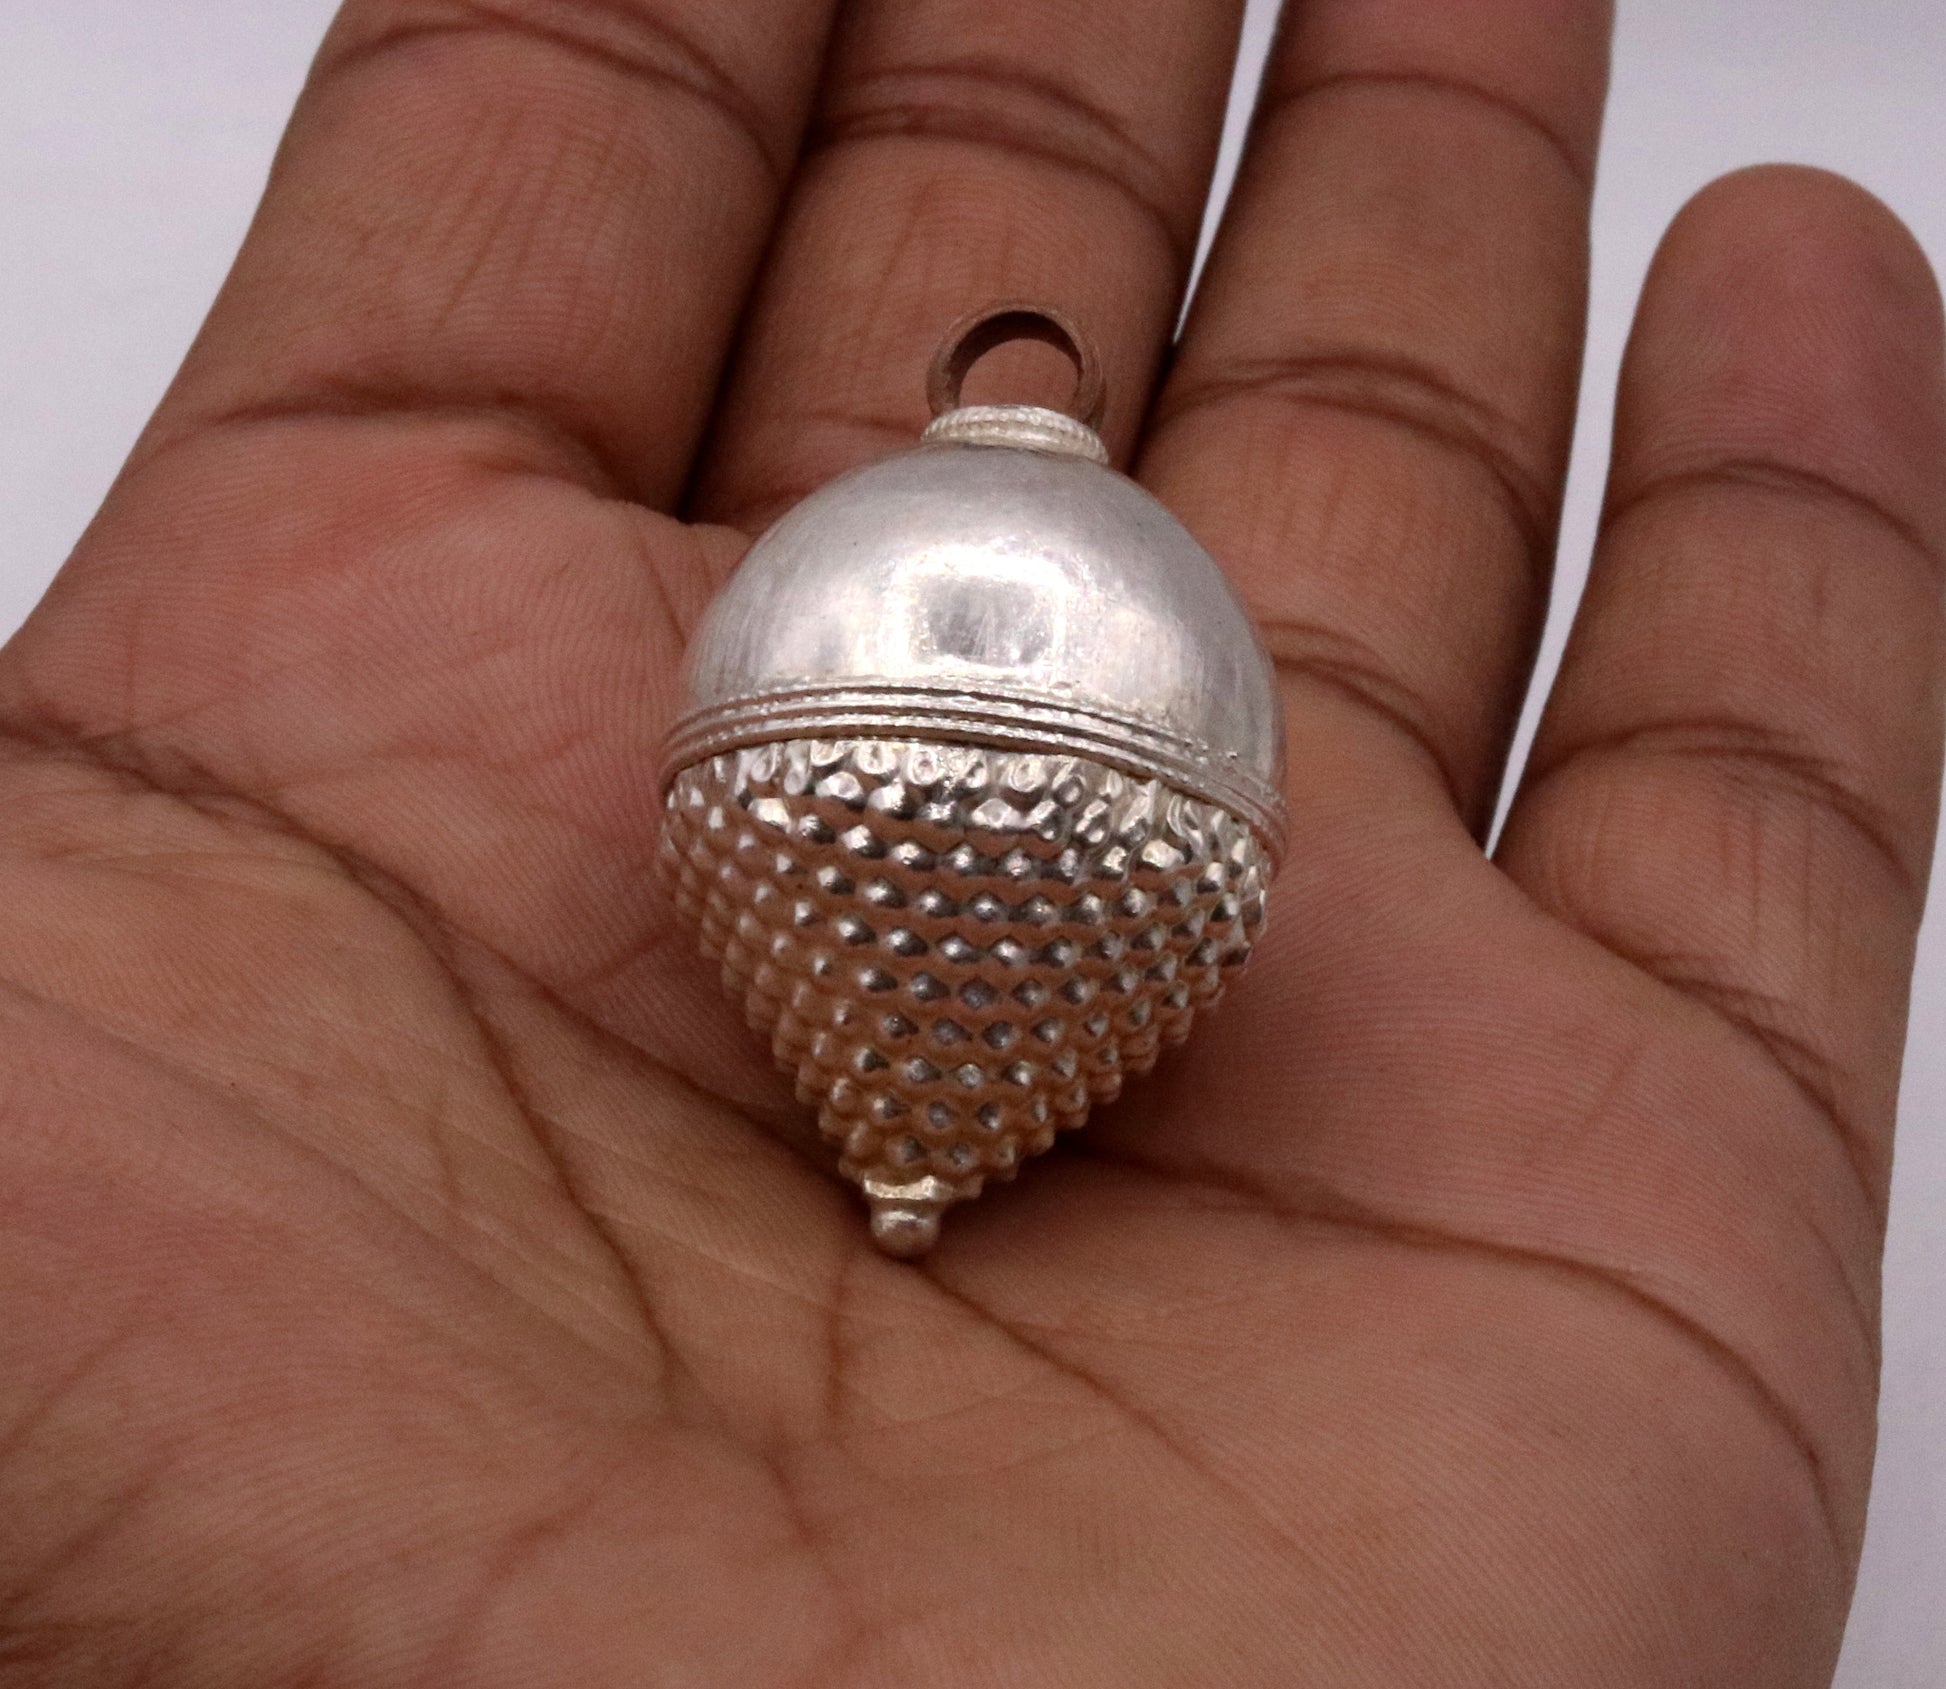 Vintage antique design handmade fabulous pendant ball pendant, excellent stylish indian tribal jewelry from Rajasthan India. - TRIBAL ORNAMENTS